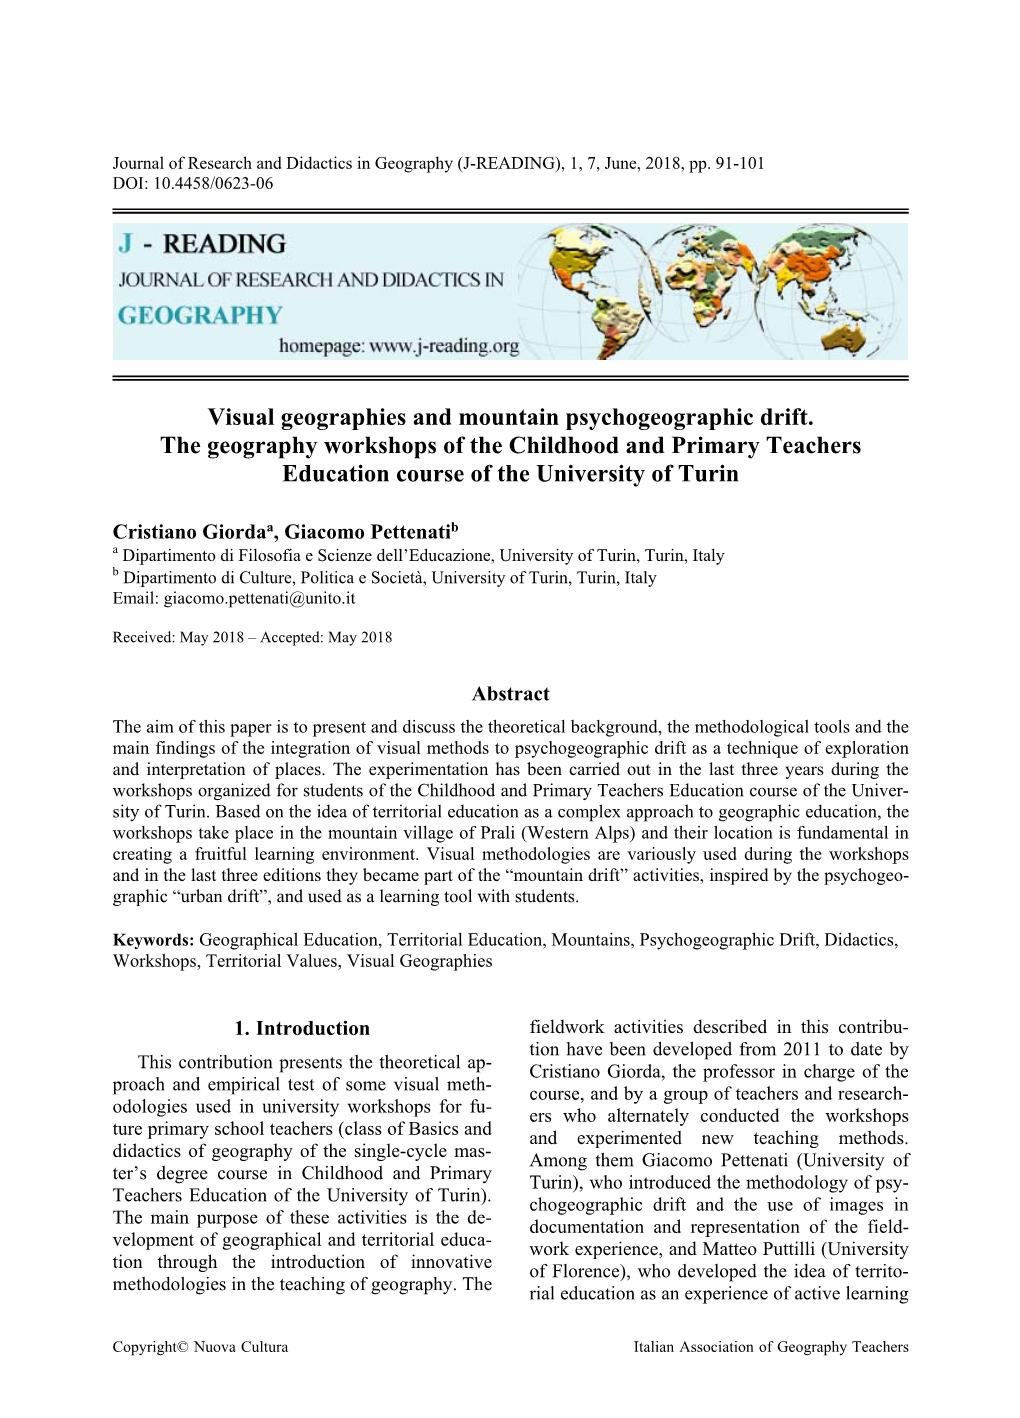 Visual Geographies and Mountain Psychogeographic Drift. the Geography Workshops of the Childhood and Primary Teachers Education Course of the University of Turin